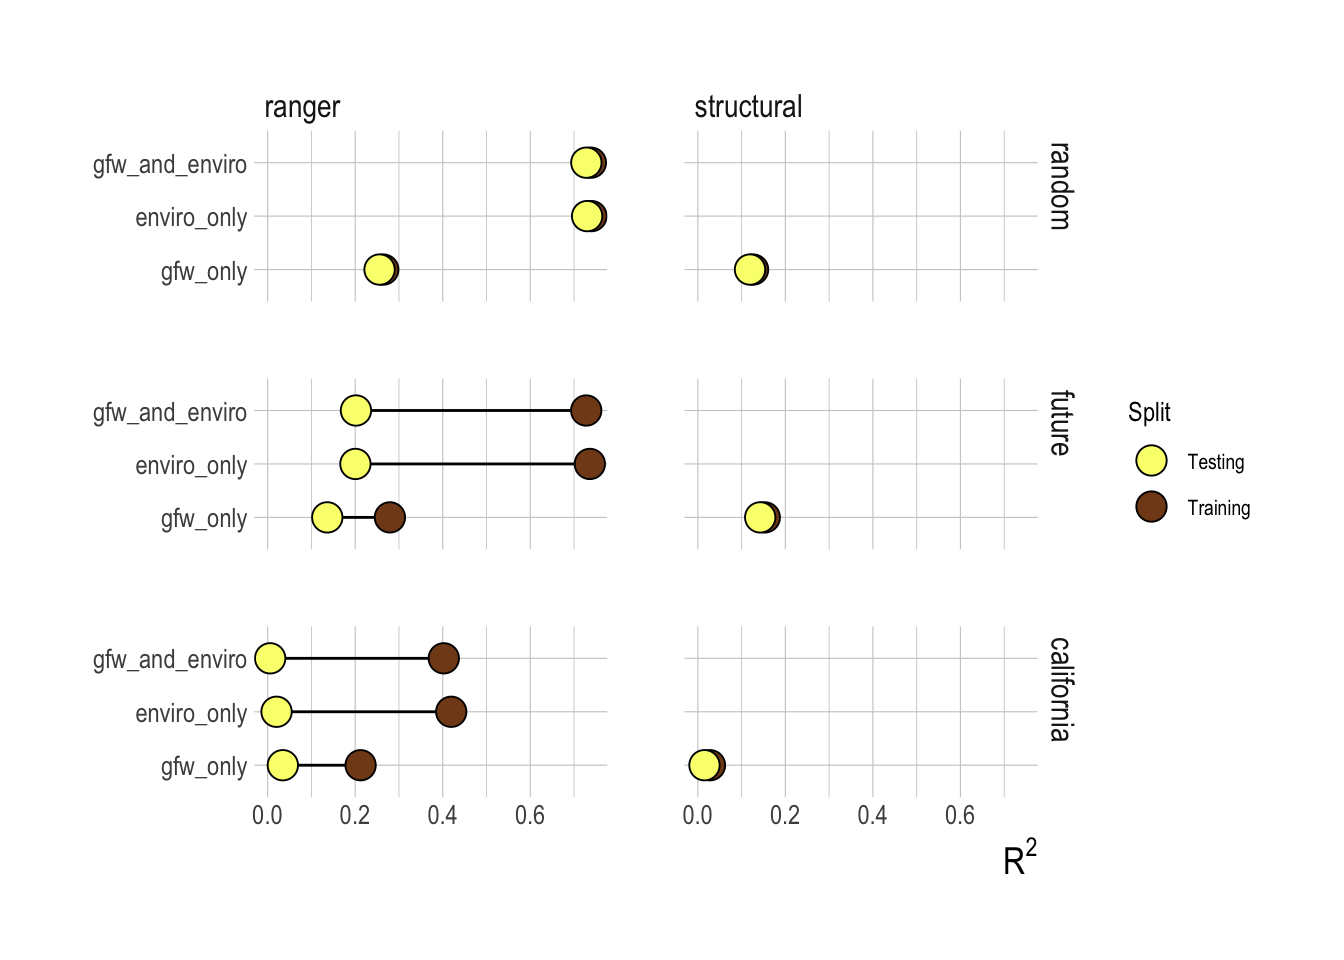 R2 for testing and training splits across candidate variables and models. Columns represent the ranger (random forest) and structural models, rows are test-training splits, where row name indicates the dataset that was held out for testing